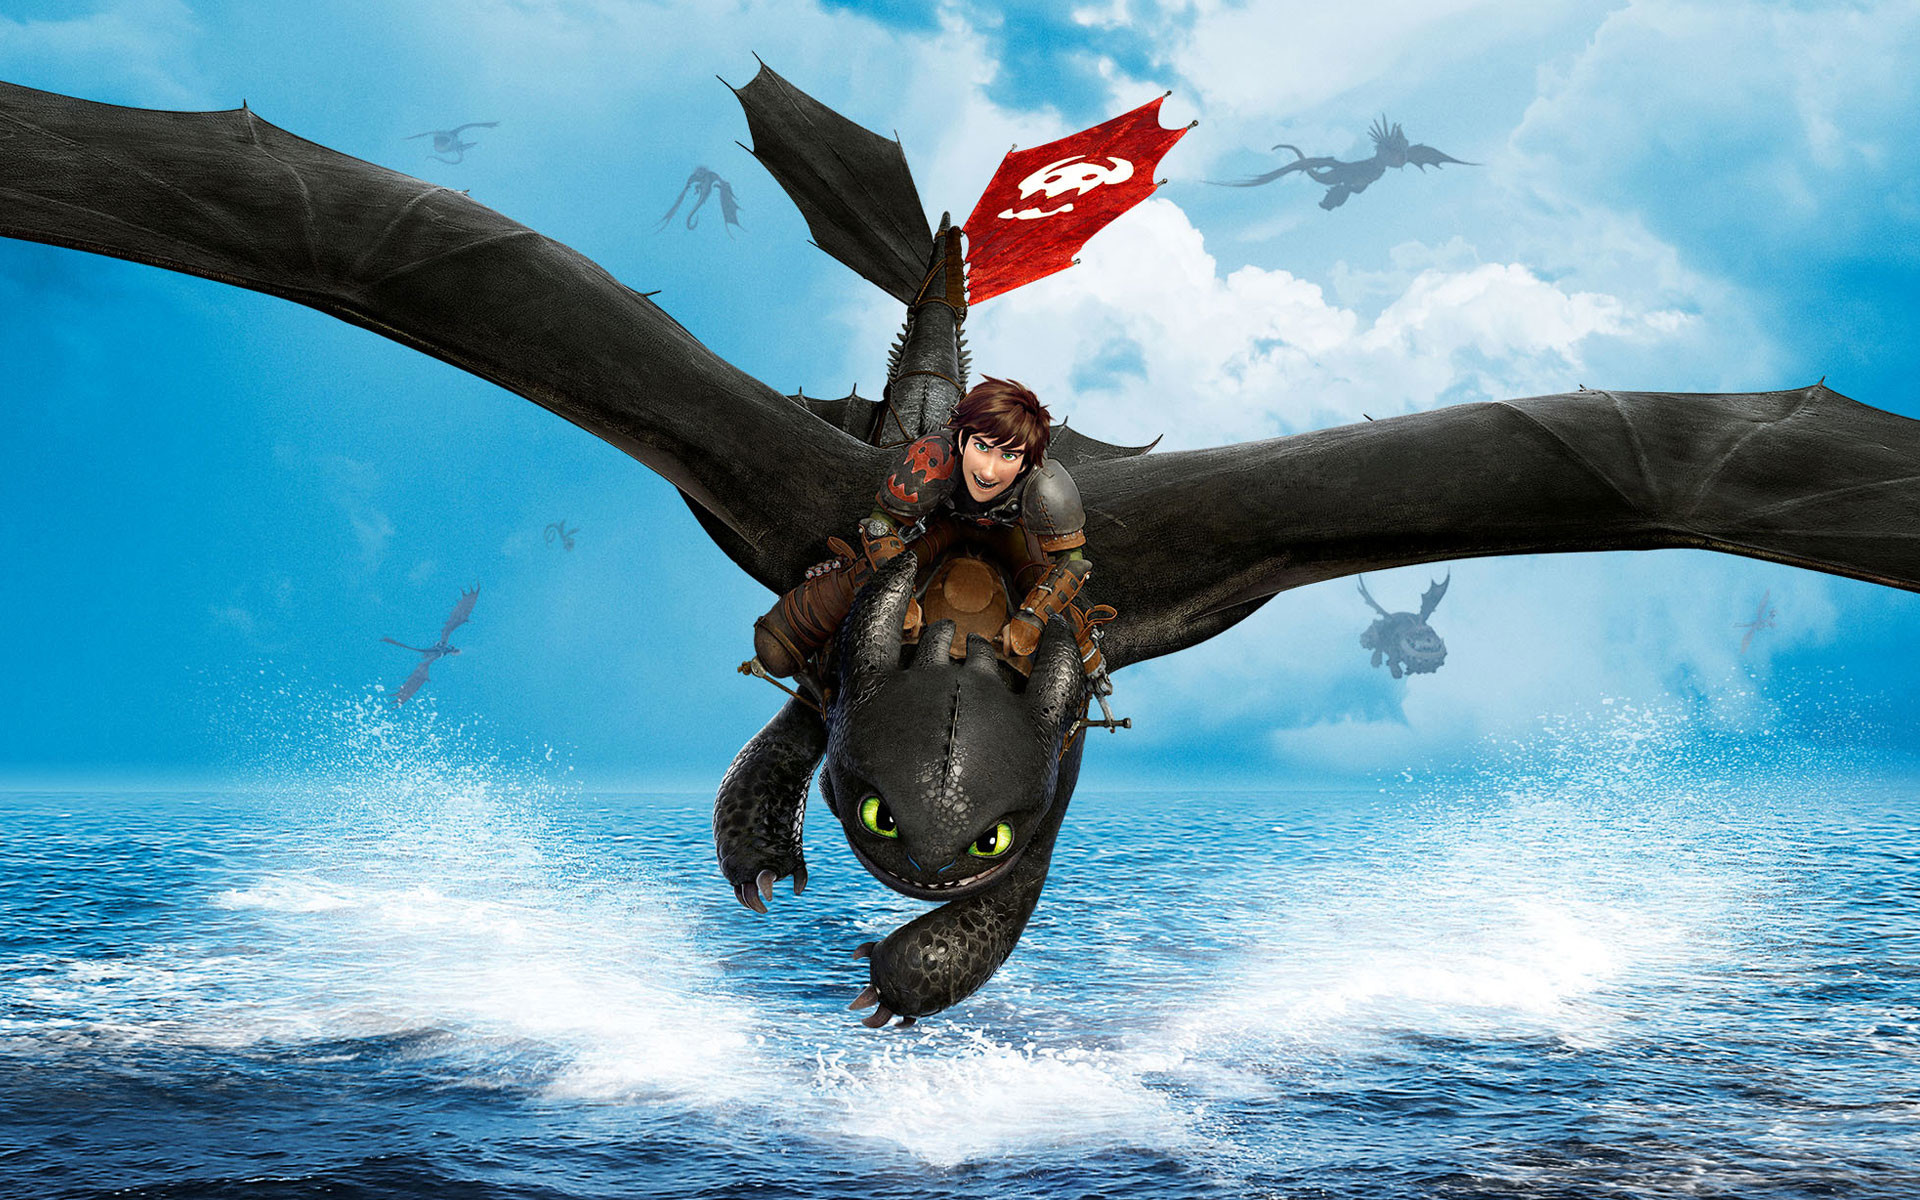 1920x1200 How to Train Your Dragon 2 - Hiccup riding Night Fury over the sea   wallpaper